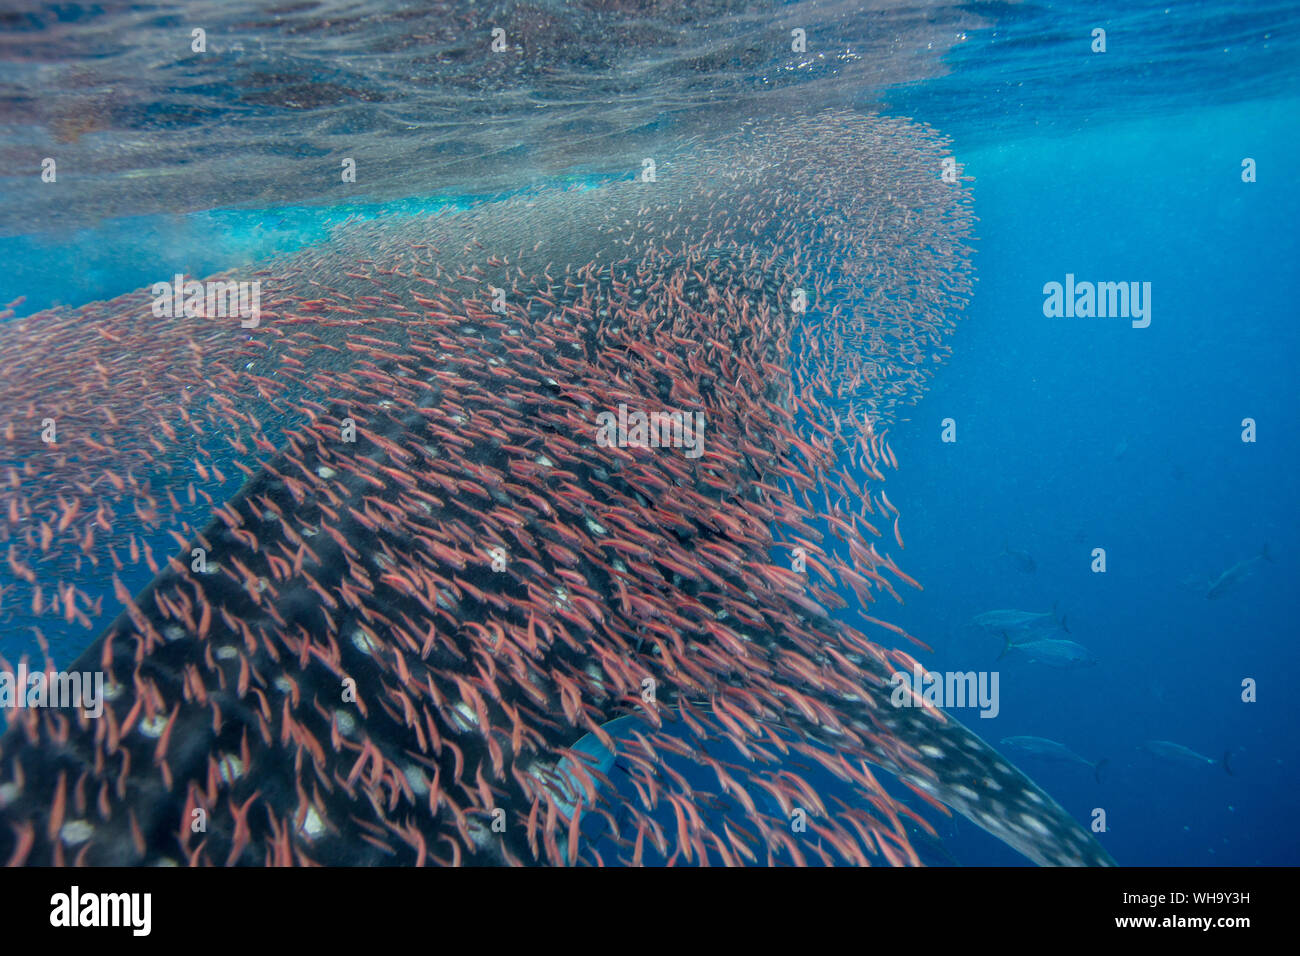 Whale shark (Rhincodon typus) vertical suction feeding on a shoal of red fish, Honda Bay, Palawan, The Philippines, Southeast Asia, Asia Stock Photo